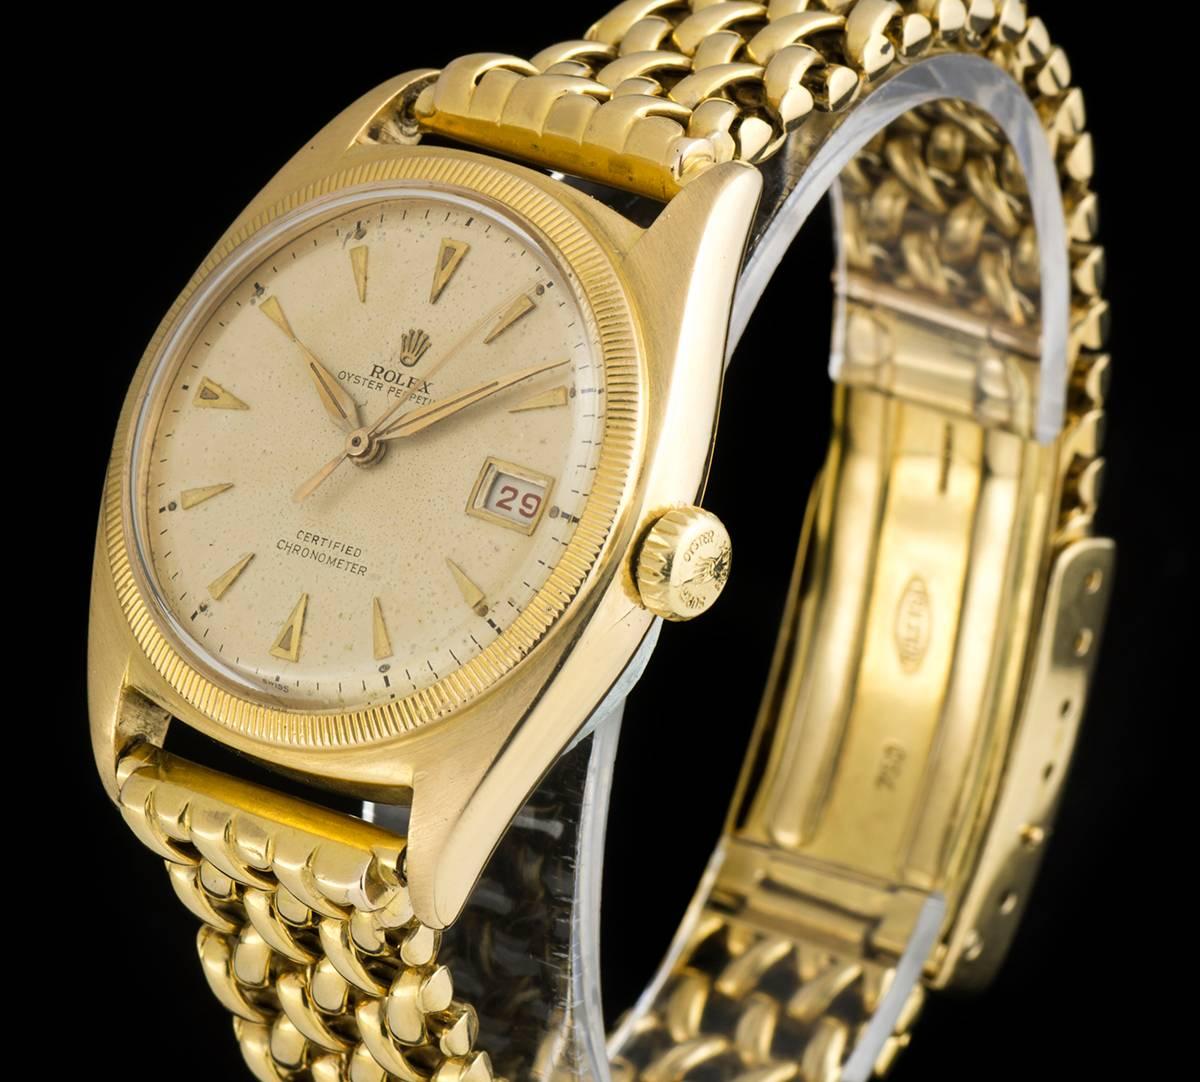 A Rare 36mm 1951 18k Yellow Gold Semi Bubble Back Oyster Perpetual Vintage Gents Wristwatch, silvered dial with applied hour markers, a fixed 18k yellow gold coin edge bezel, a very rare original 18k yellow gold bracelet with an original 18k yellow